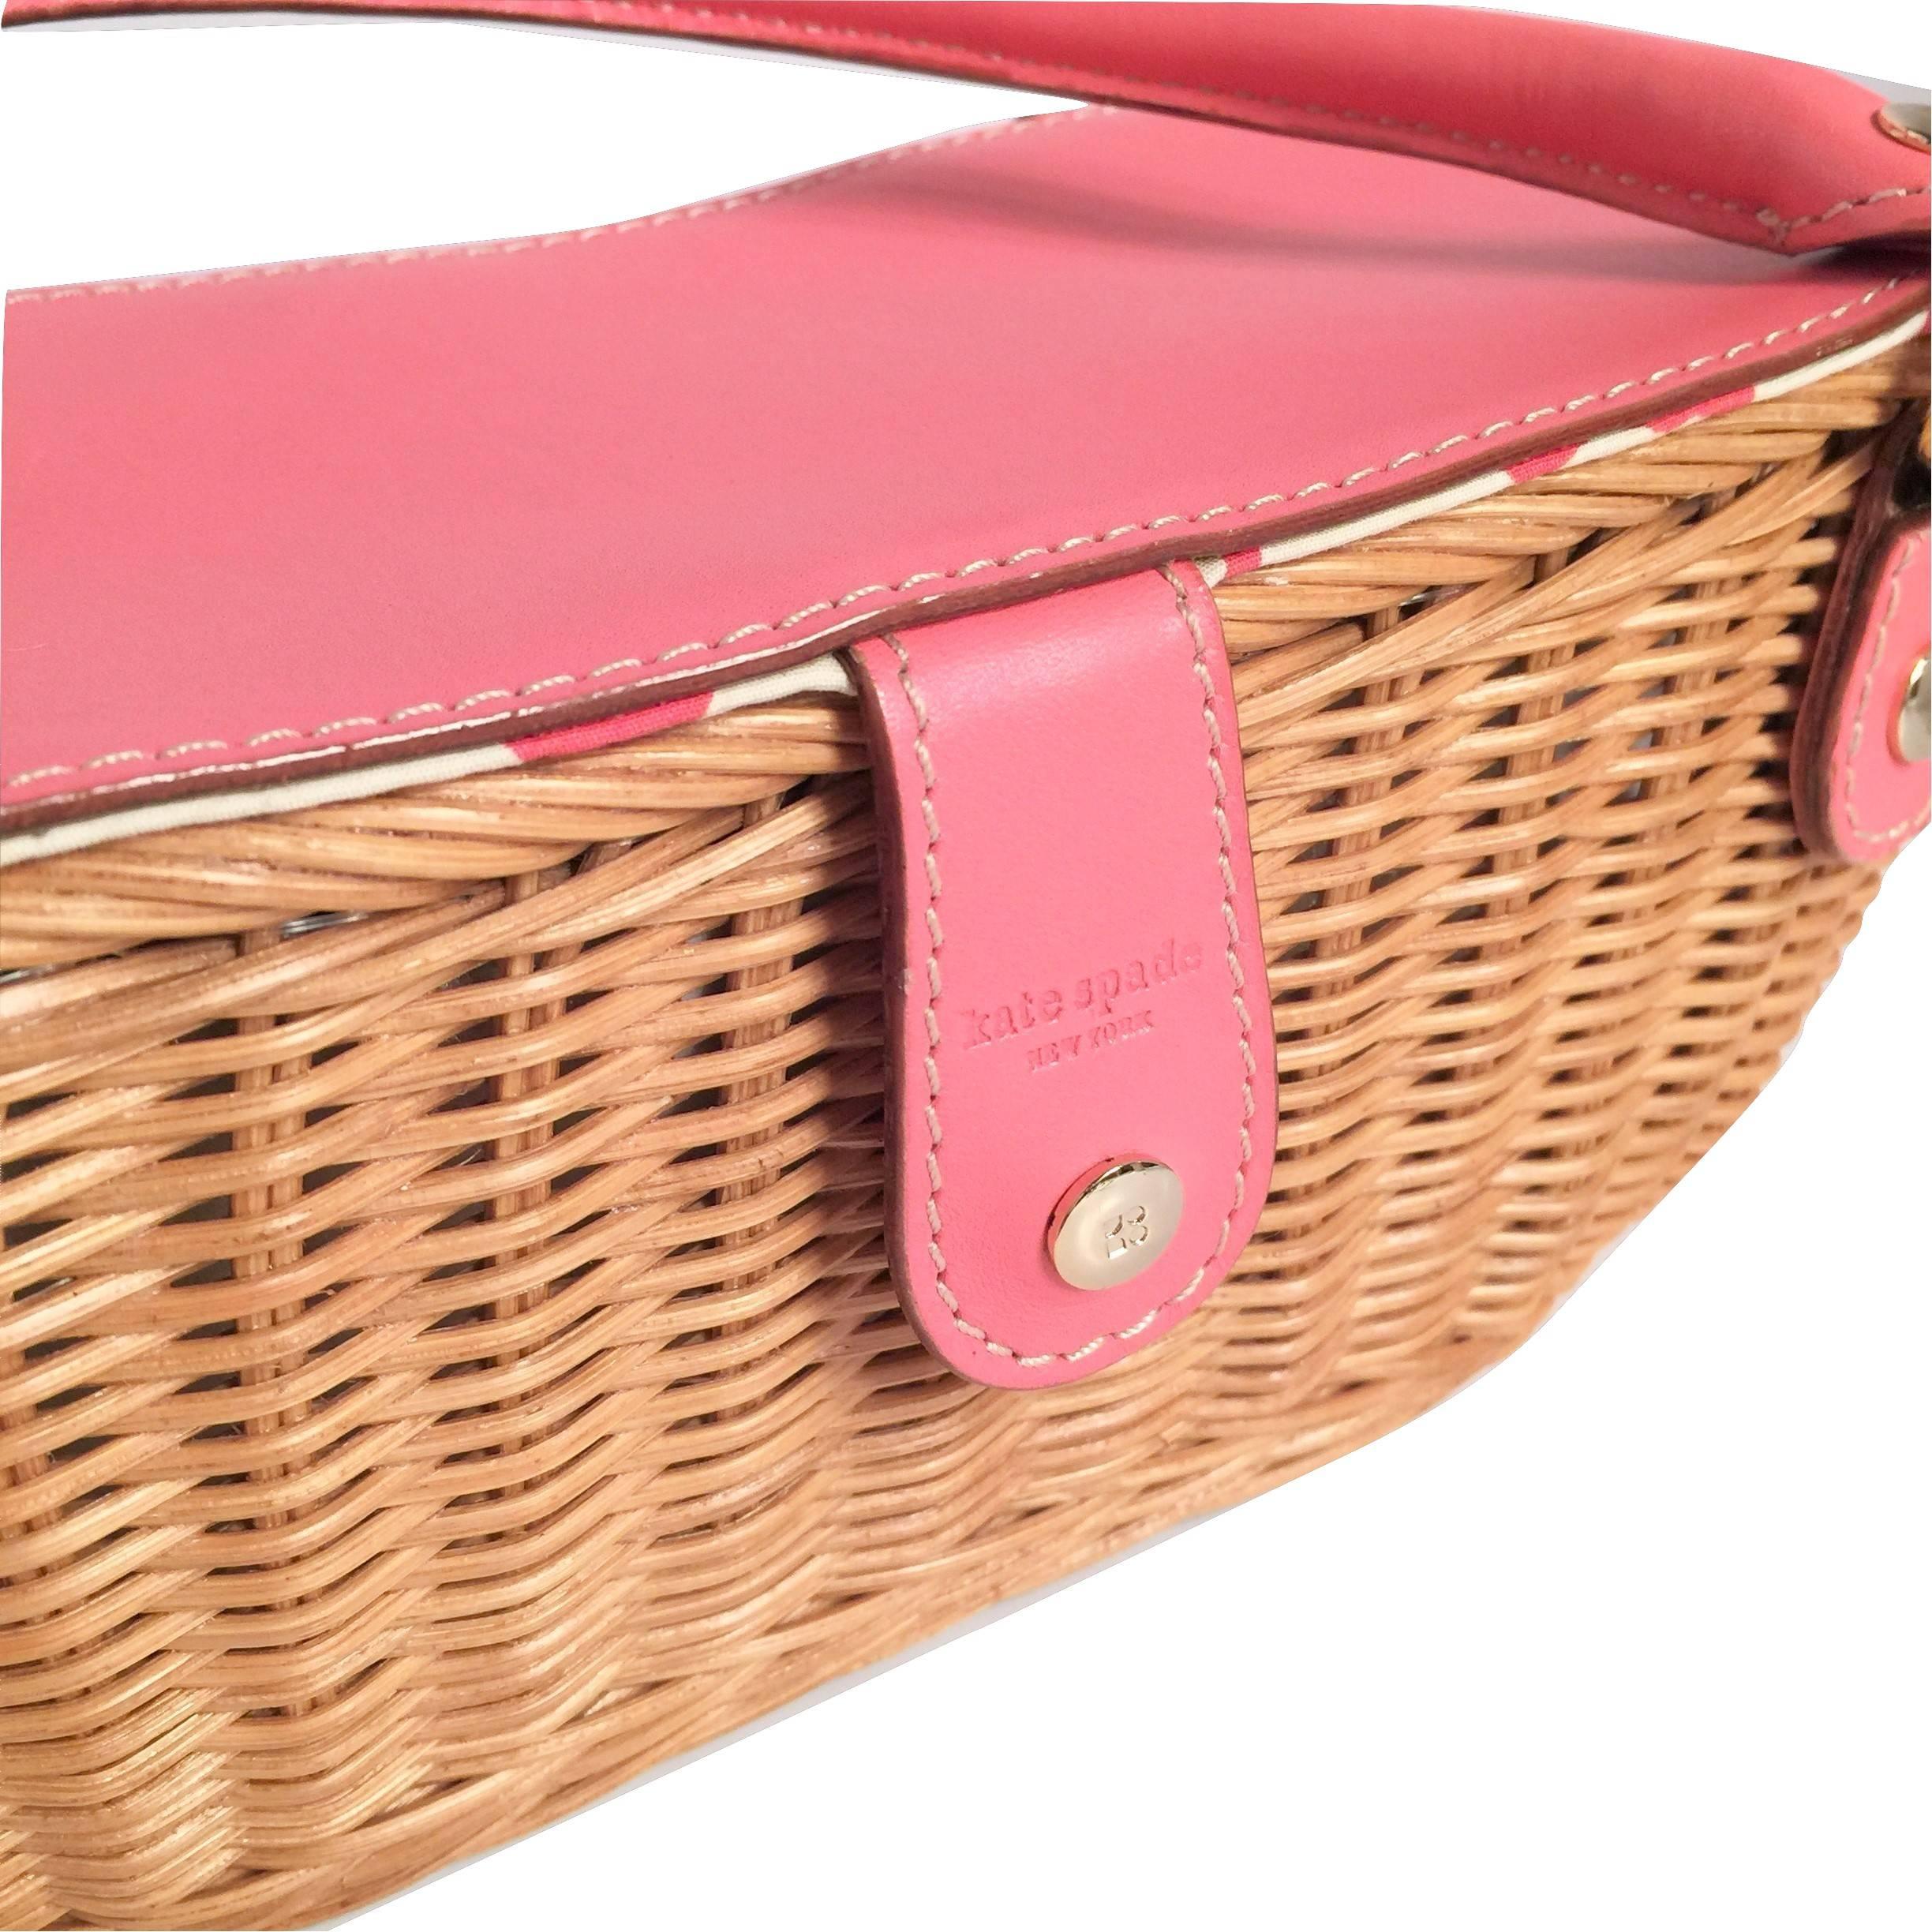 New Kate Spade Her Rare Spring 2005 Final Collection Pink Wicker Basket Bag 6